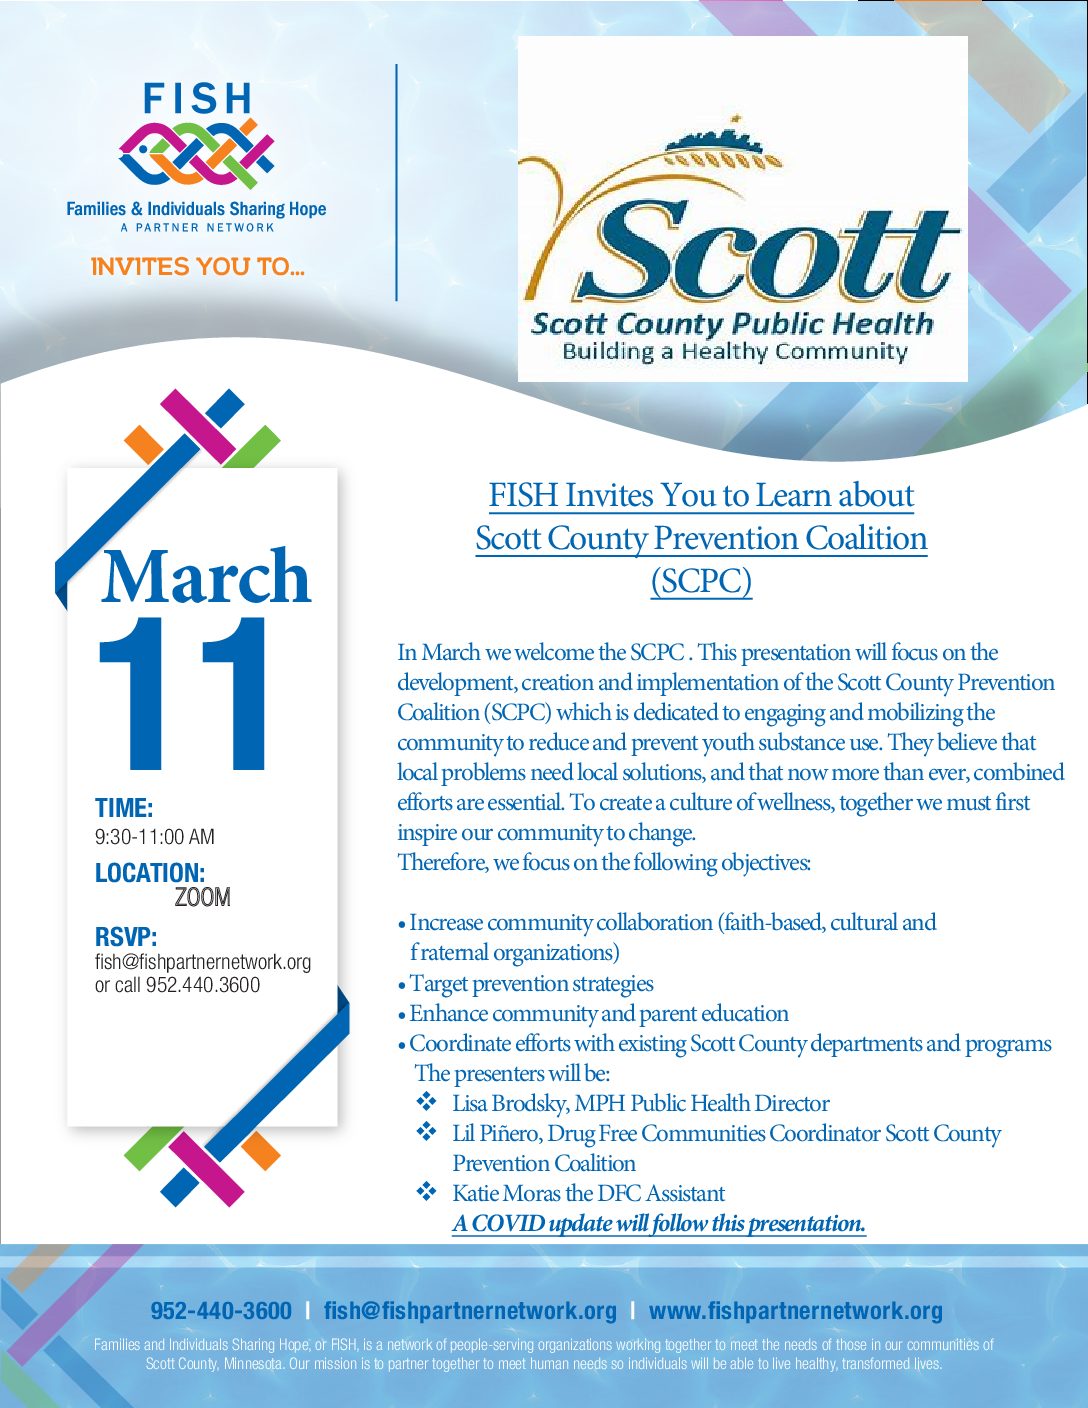 March 11 Virtual FISH Meeting – Drug-Free Communities and Covid Update!